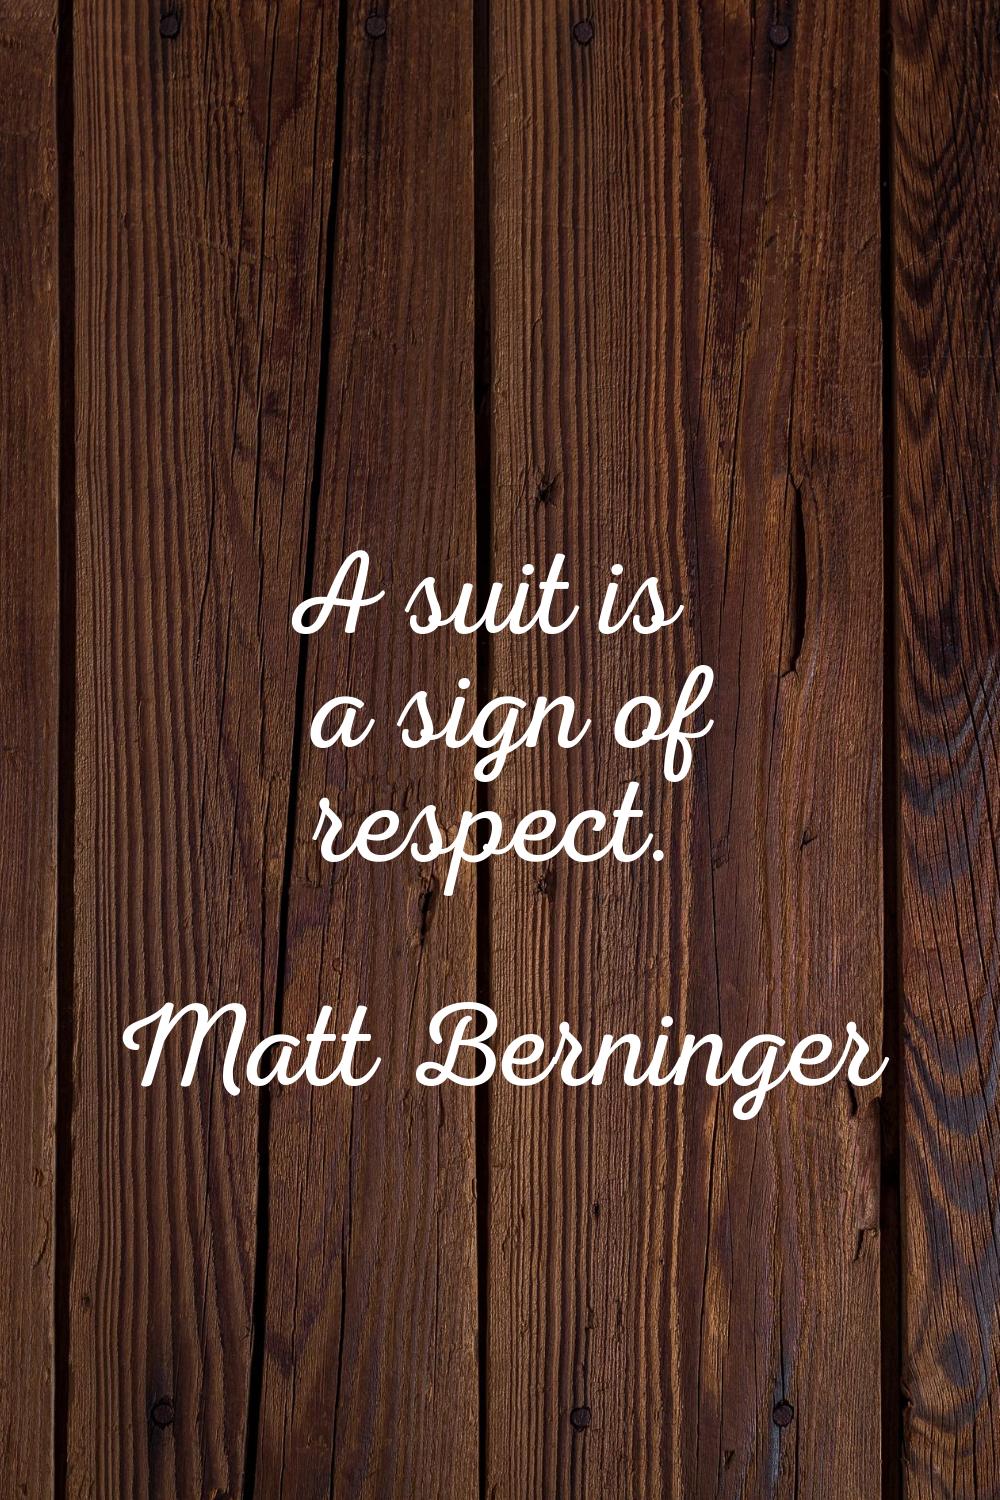 A suit is a sign of respect.